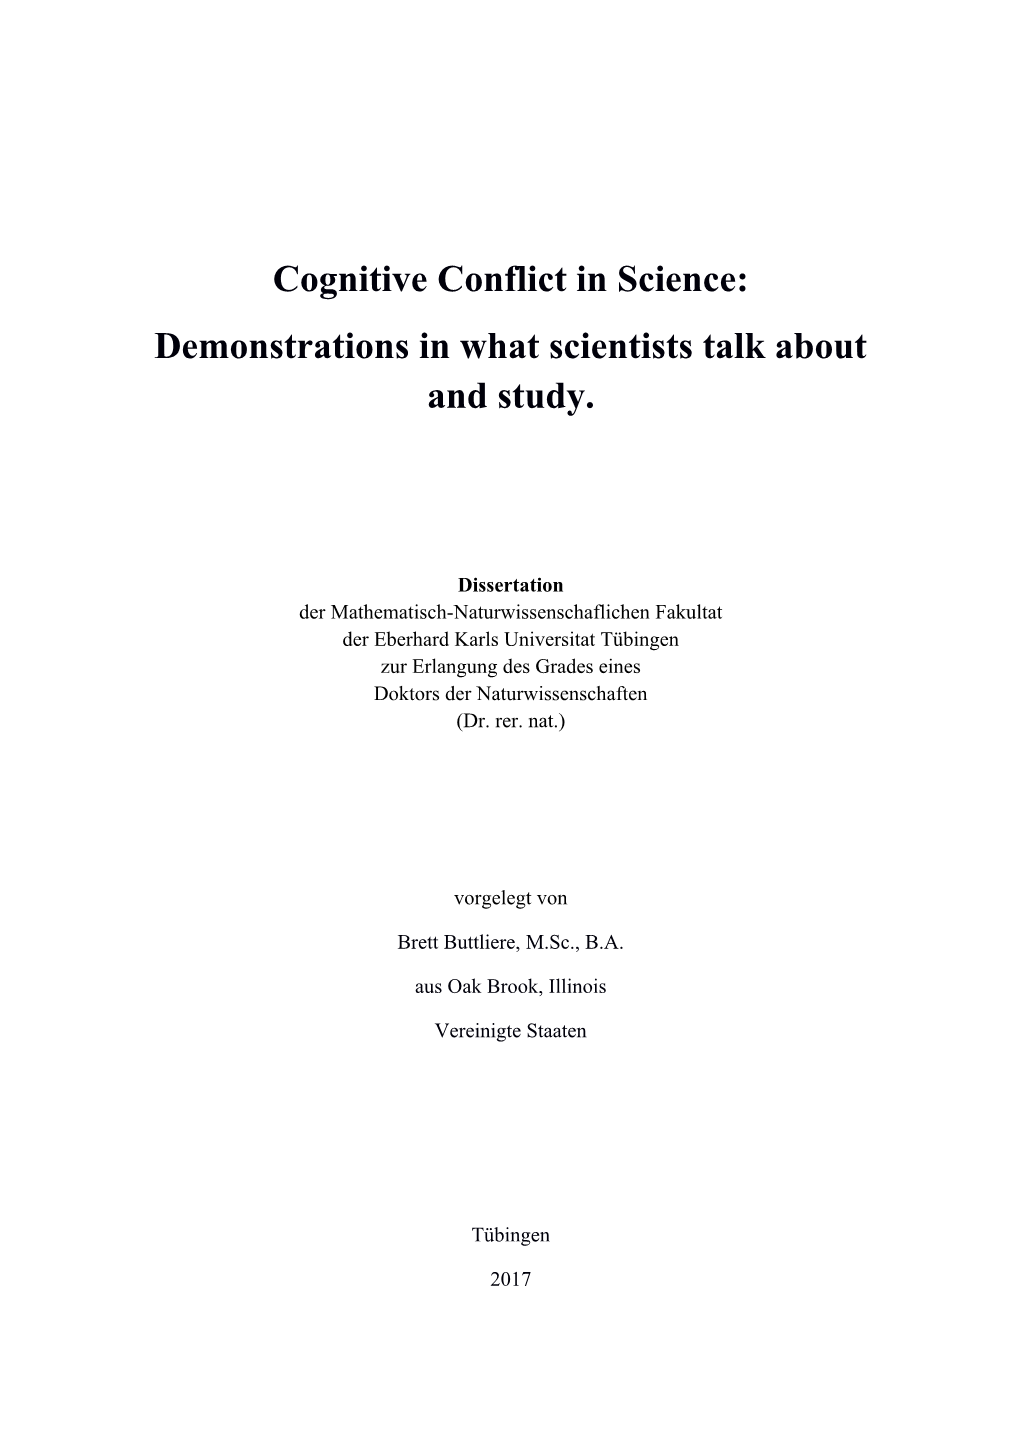 Cognitive Conflict in Science: Demonstrations in What Scientists Talk About and Study